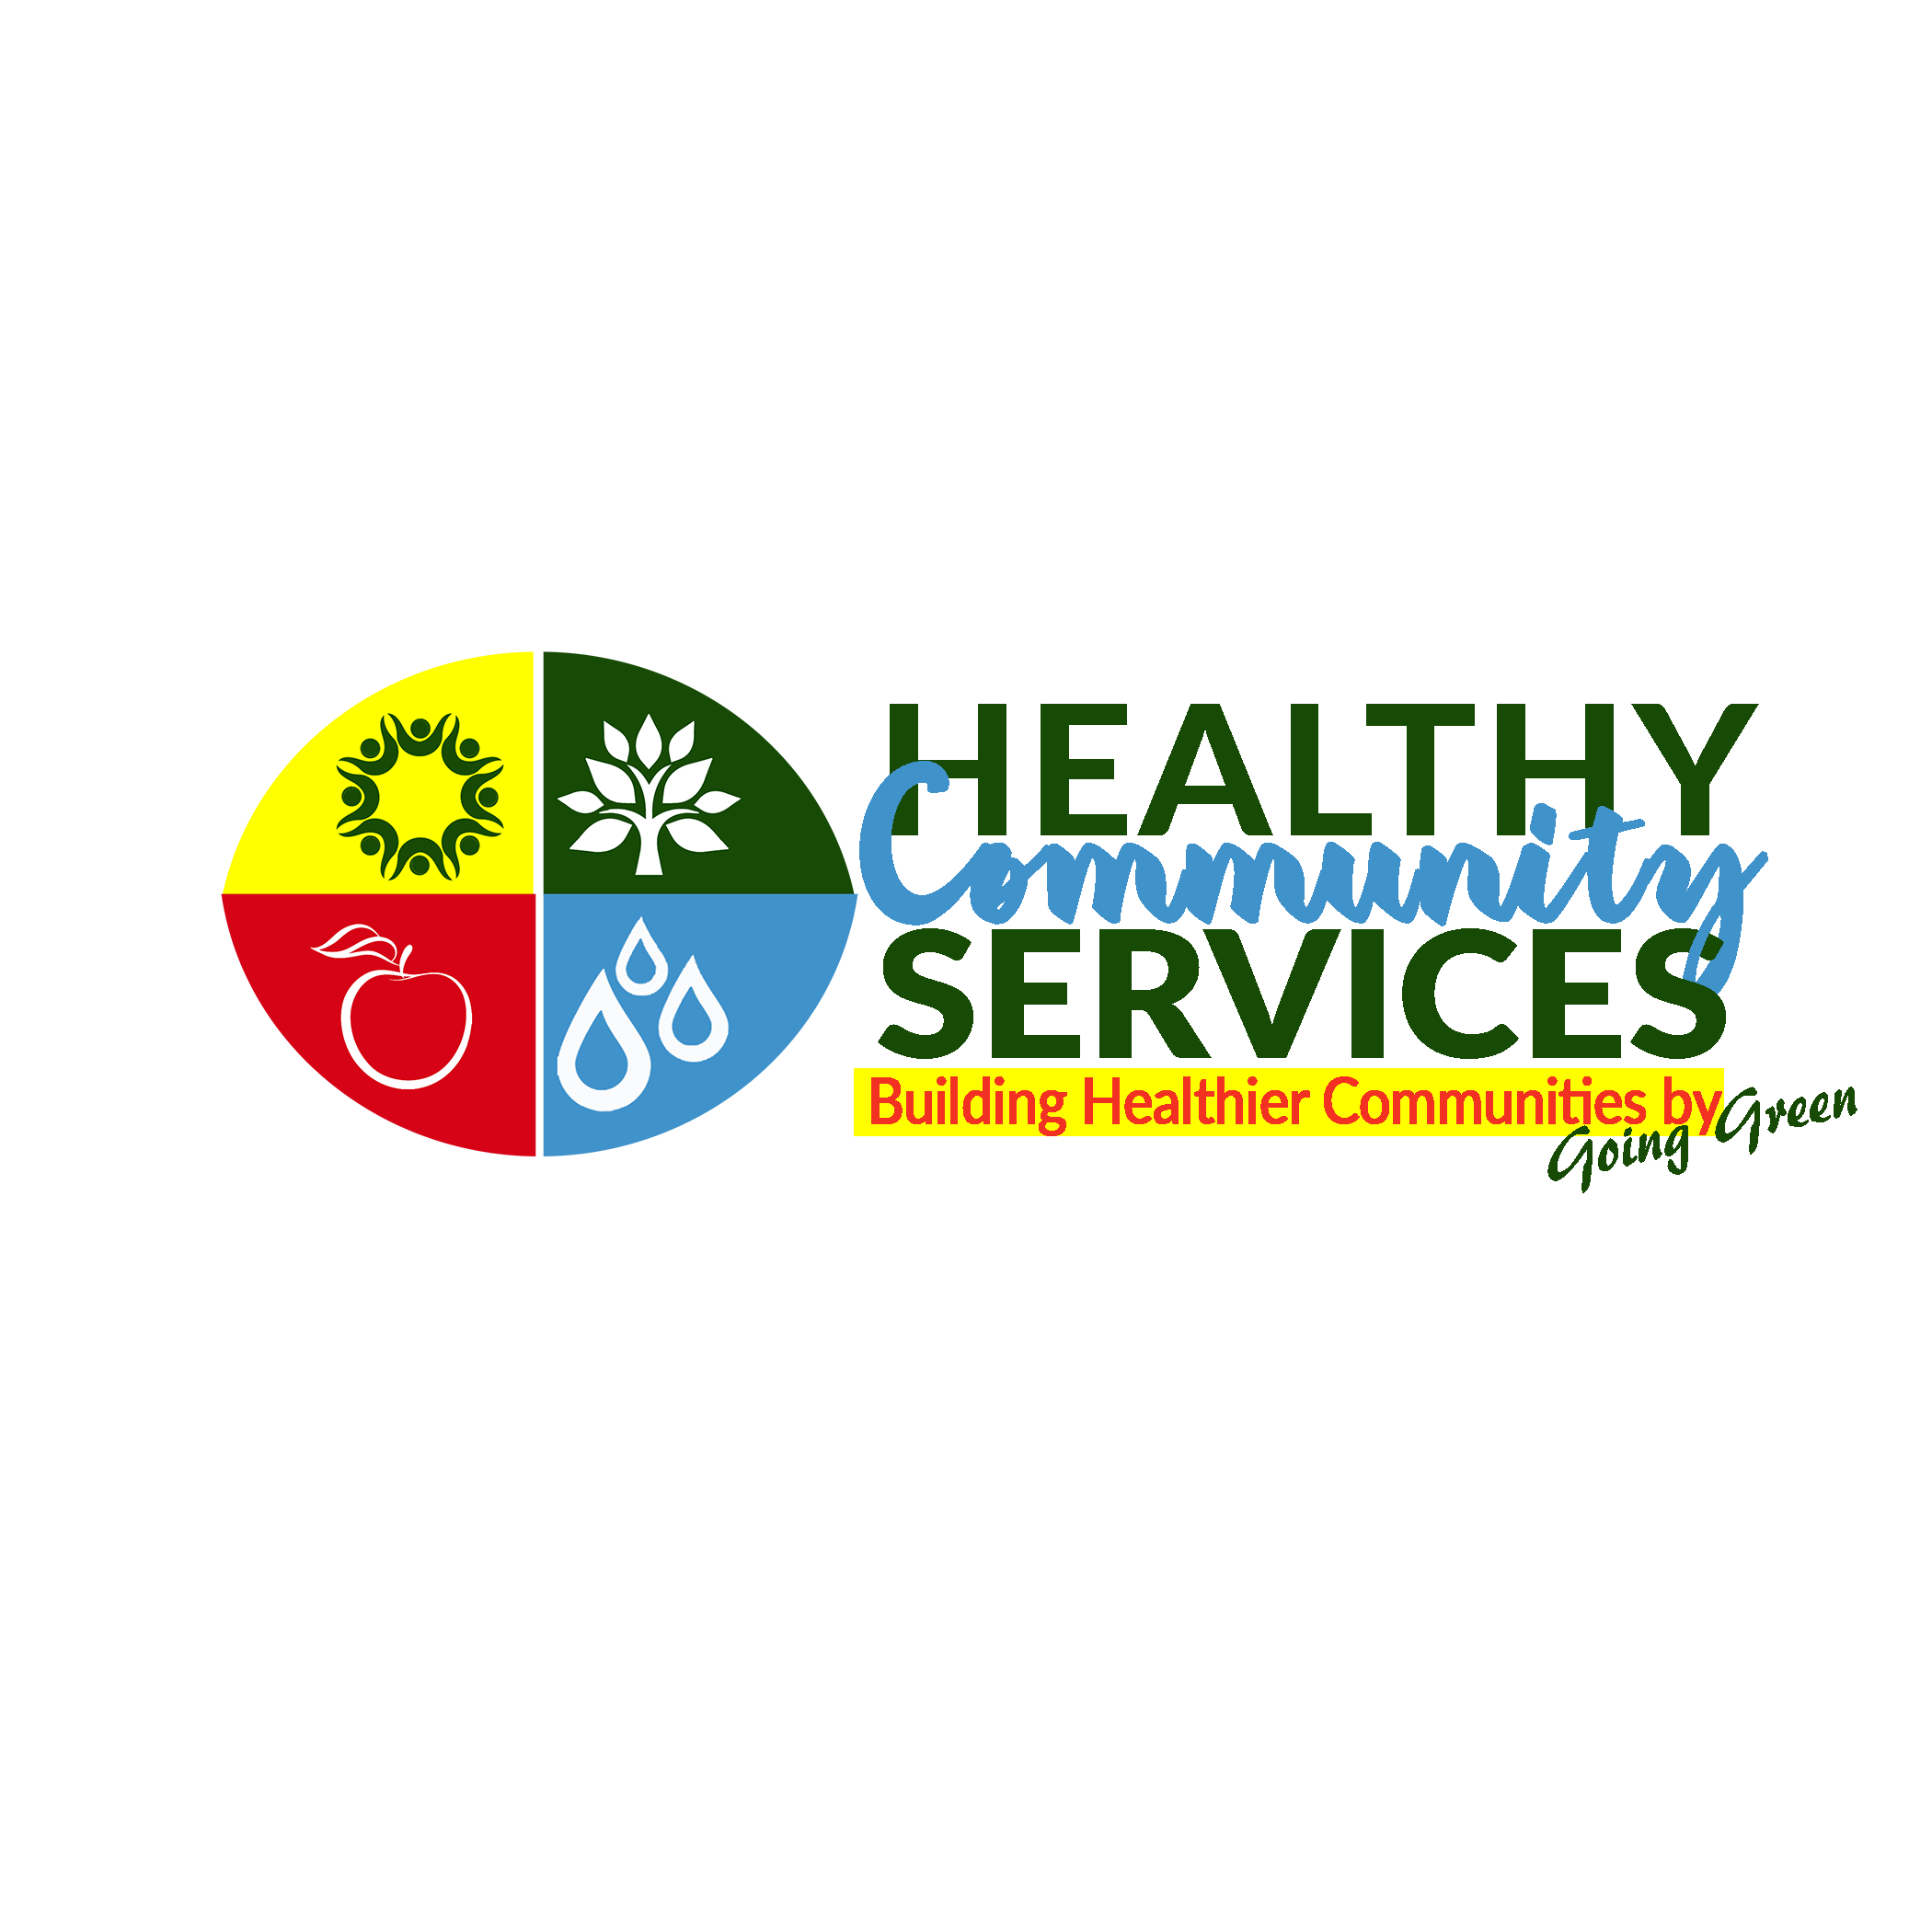 Healthy Community Services, American Climate Leadership Awards 2022 Finalist